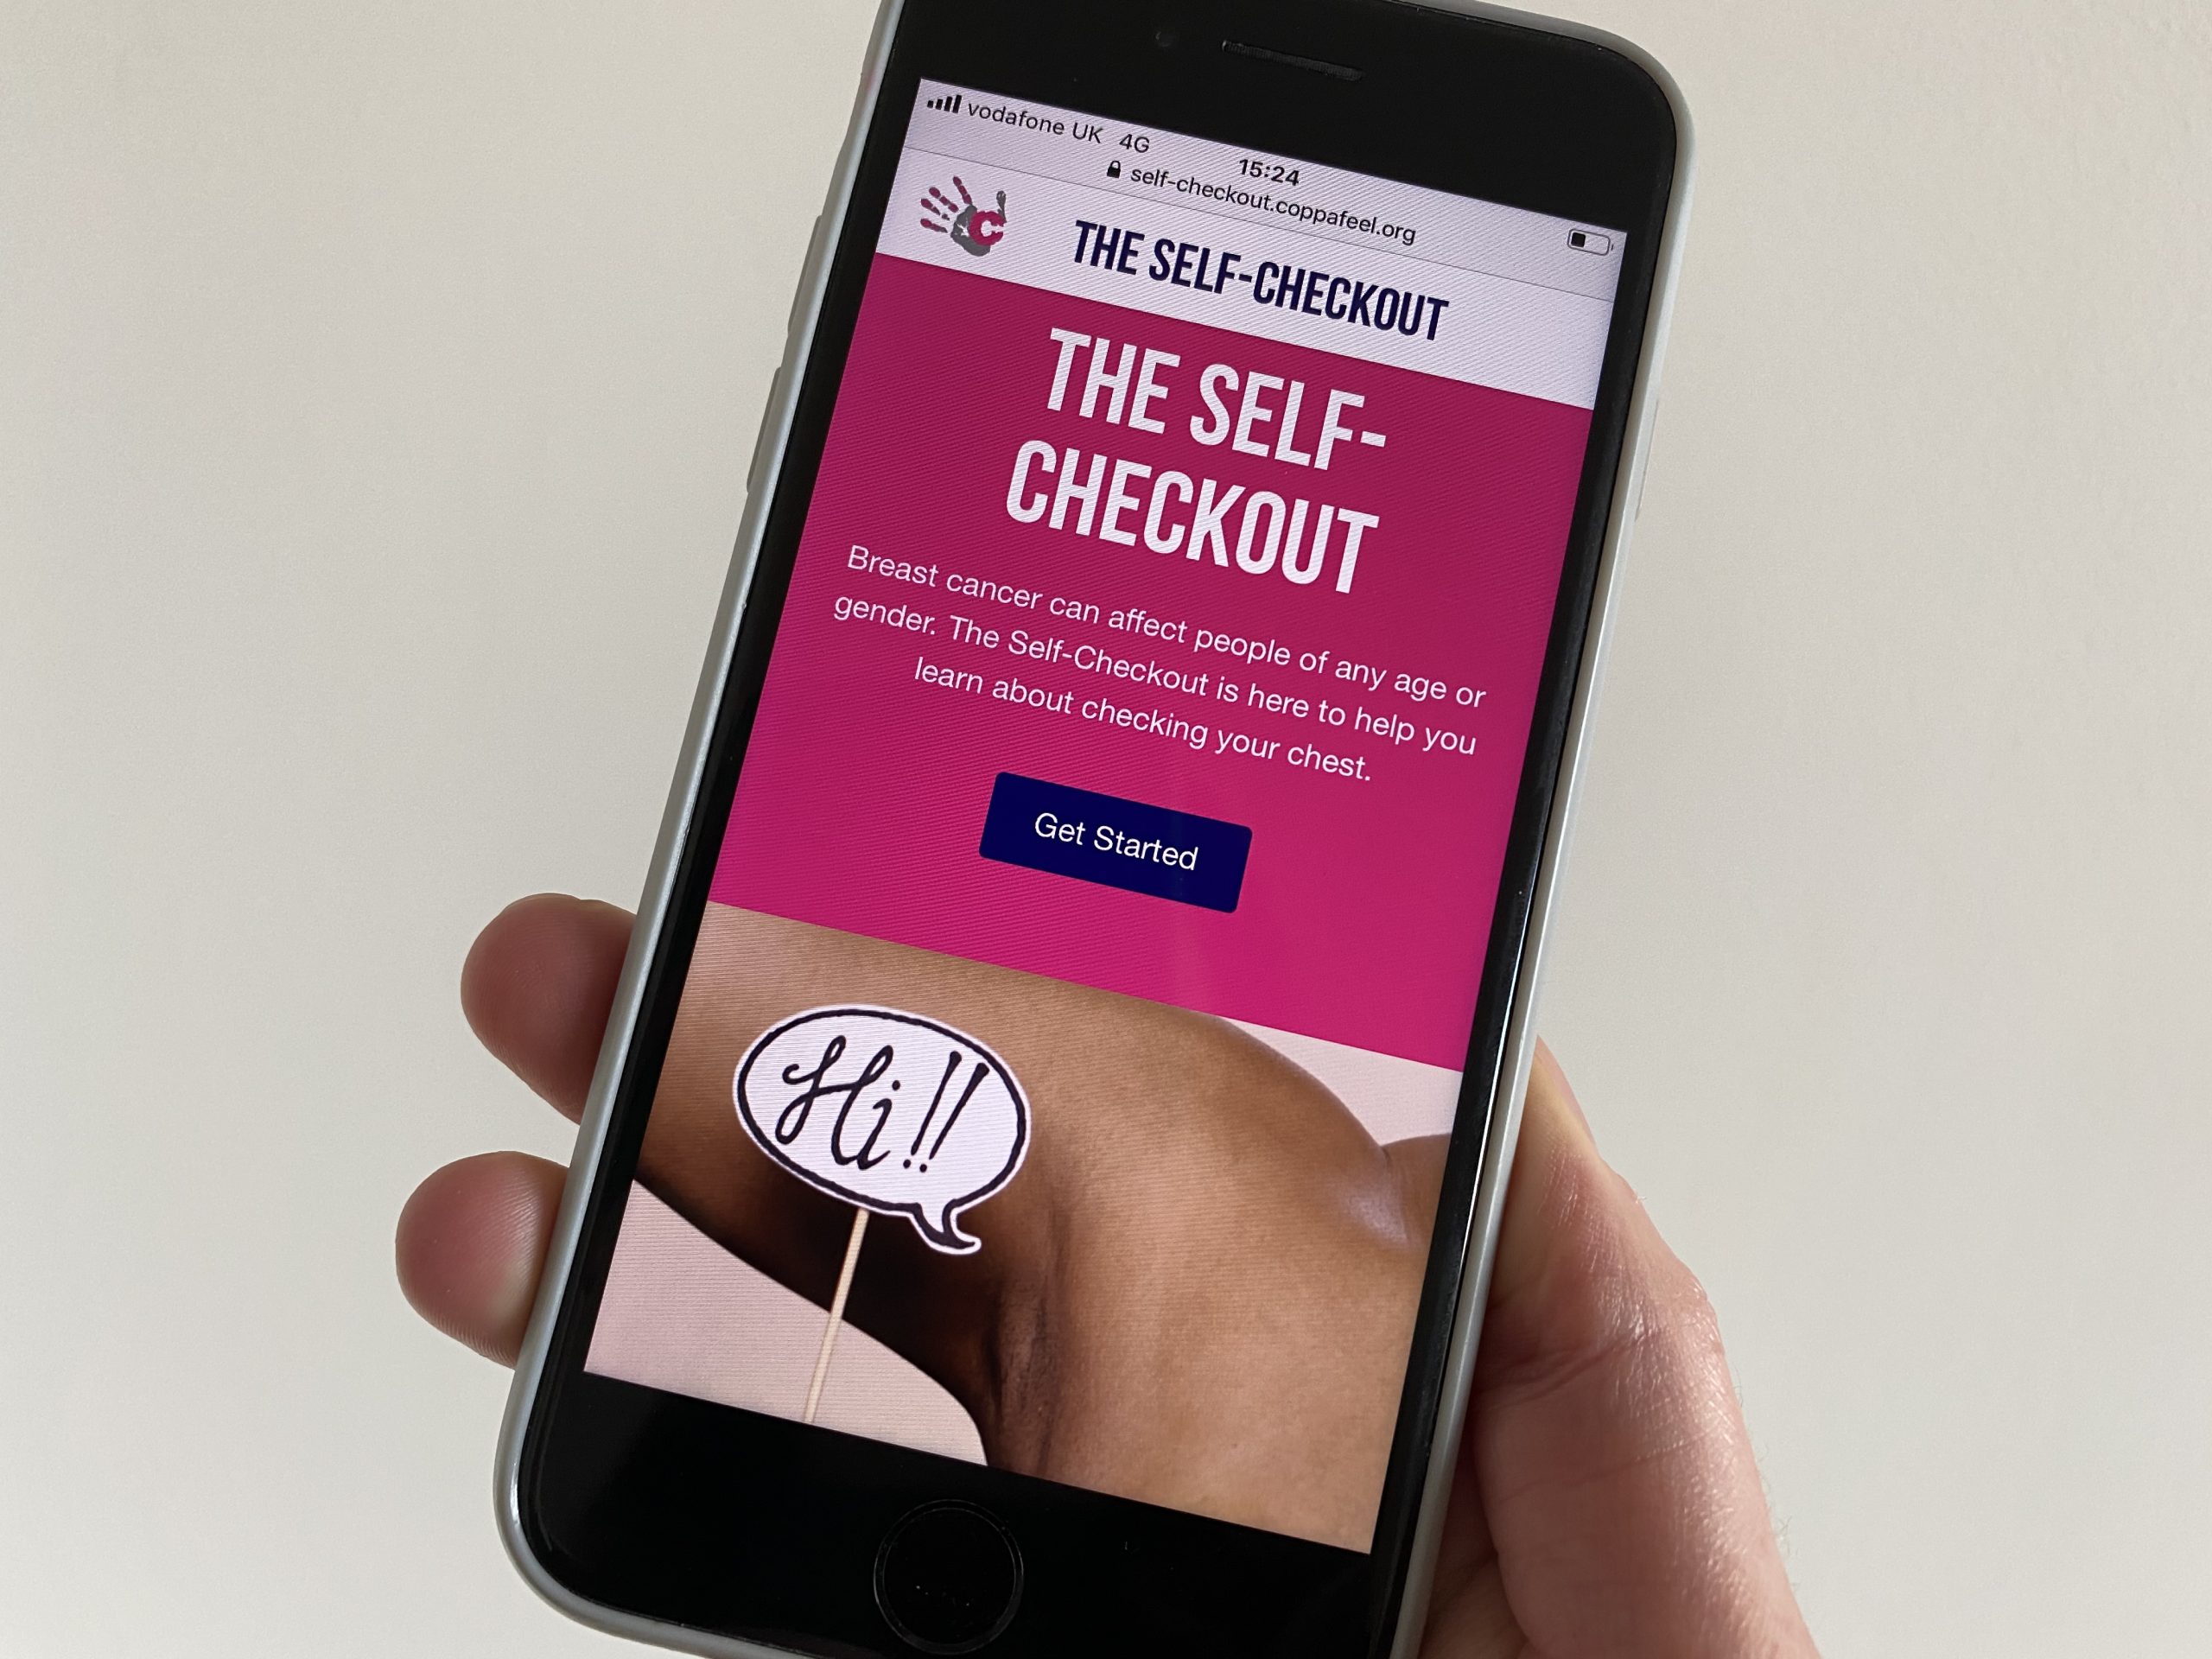 A hand holding an Iphone using the CoppaFeel! self checkout checking tool